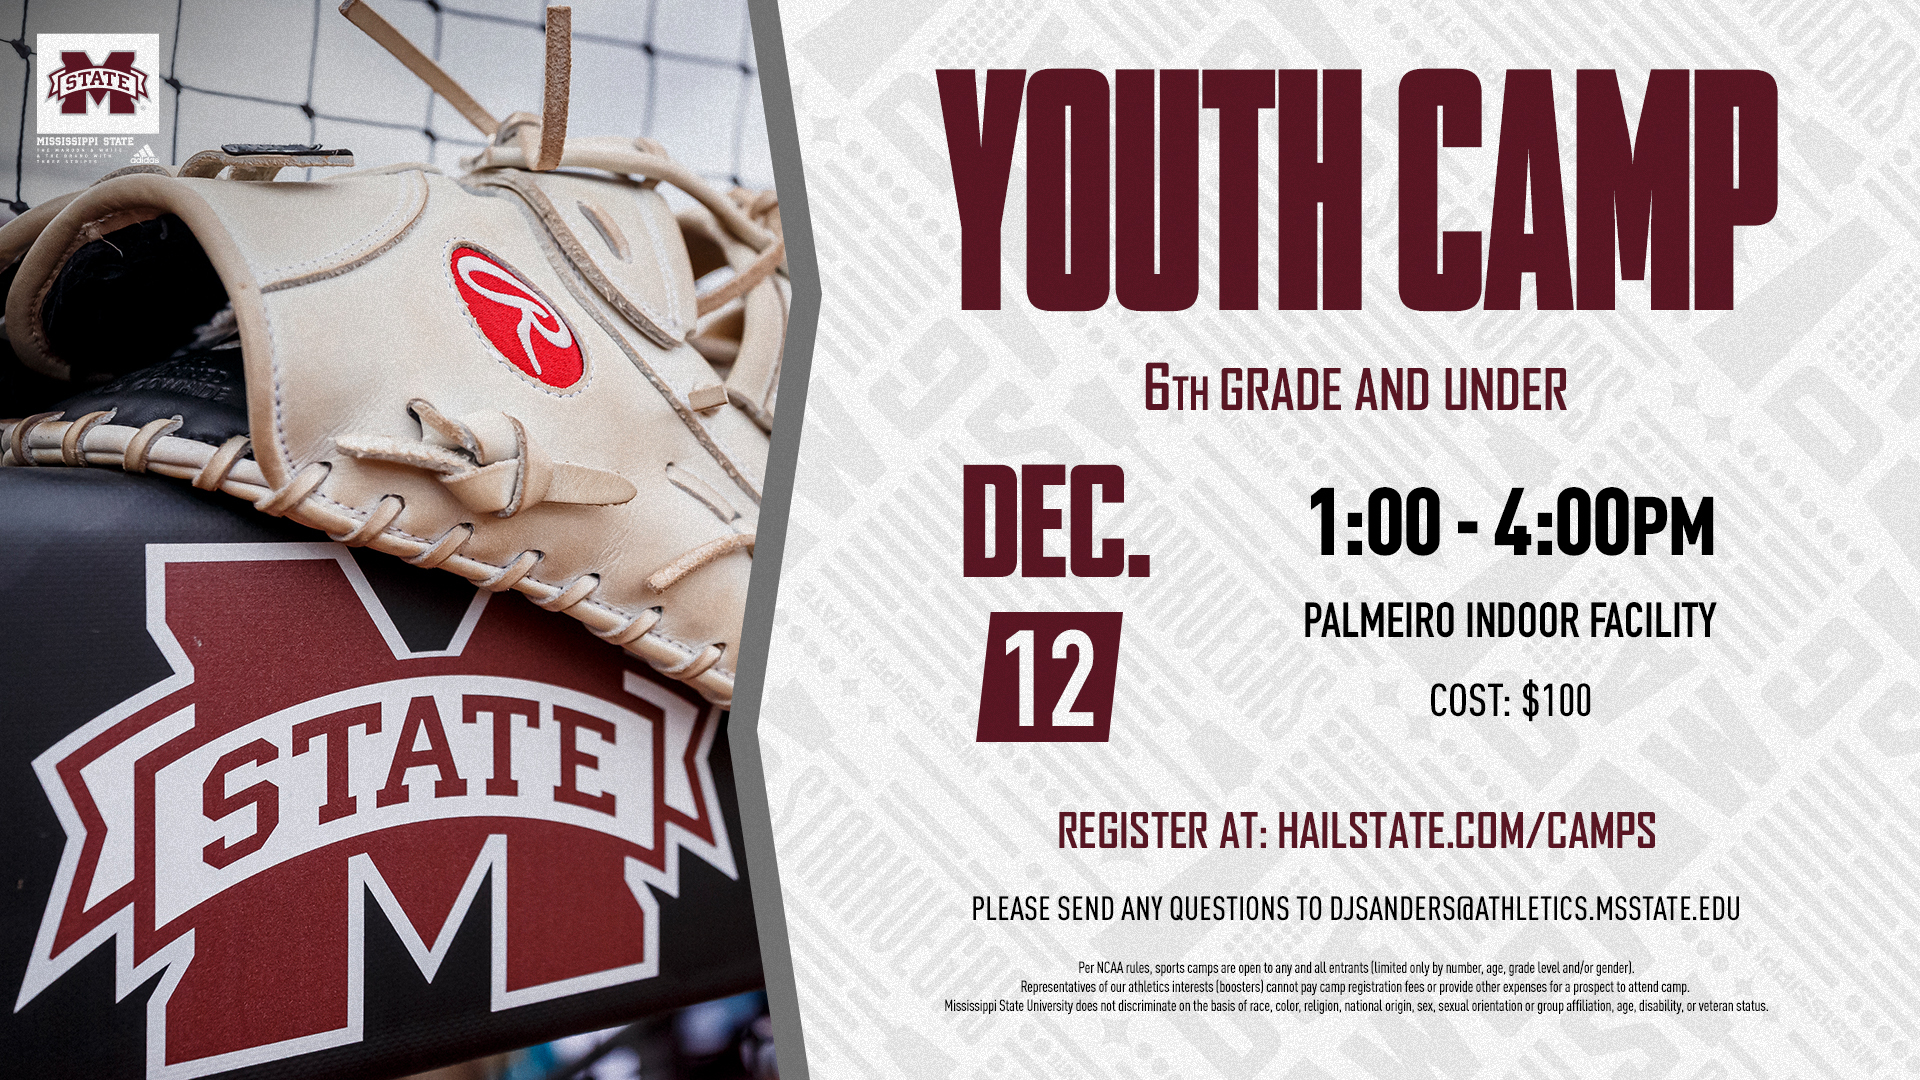 Maroon and white graphic with information about MSU Softball's Youth Camp